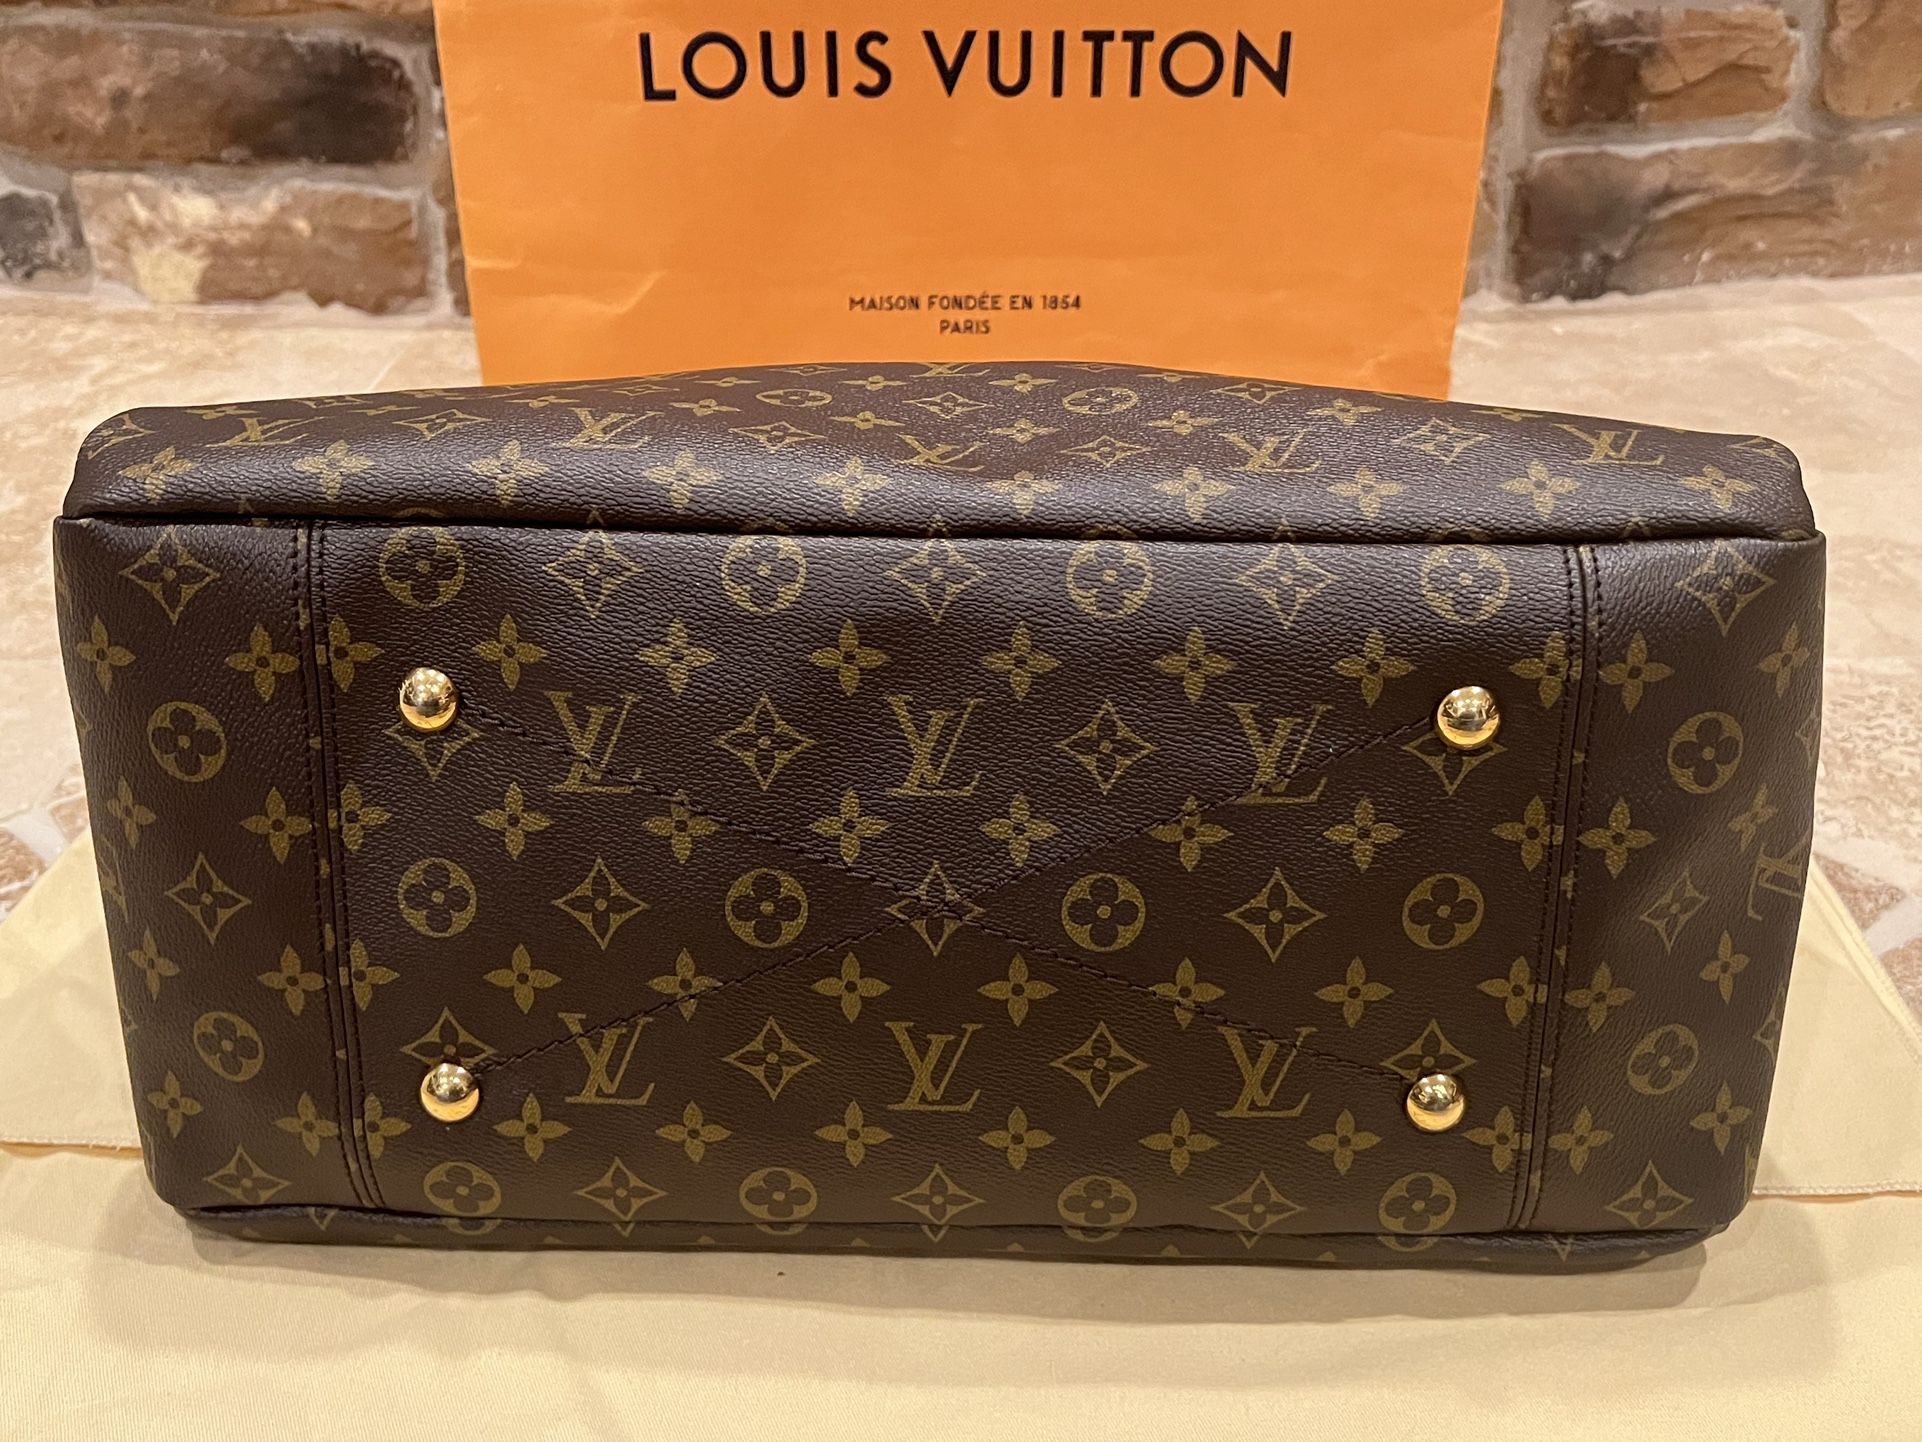 Authentic Louis Vuitton Artsy Bag for Sale in Boerne, TX - OfferUp